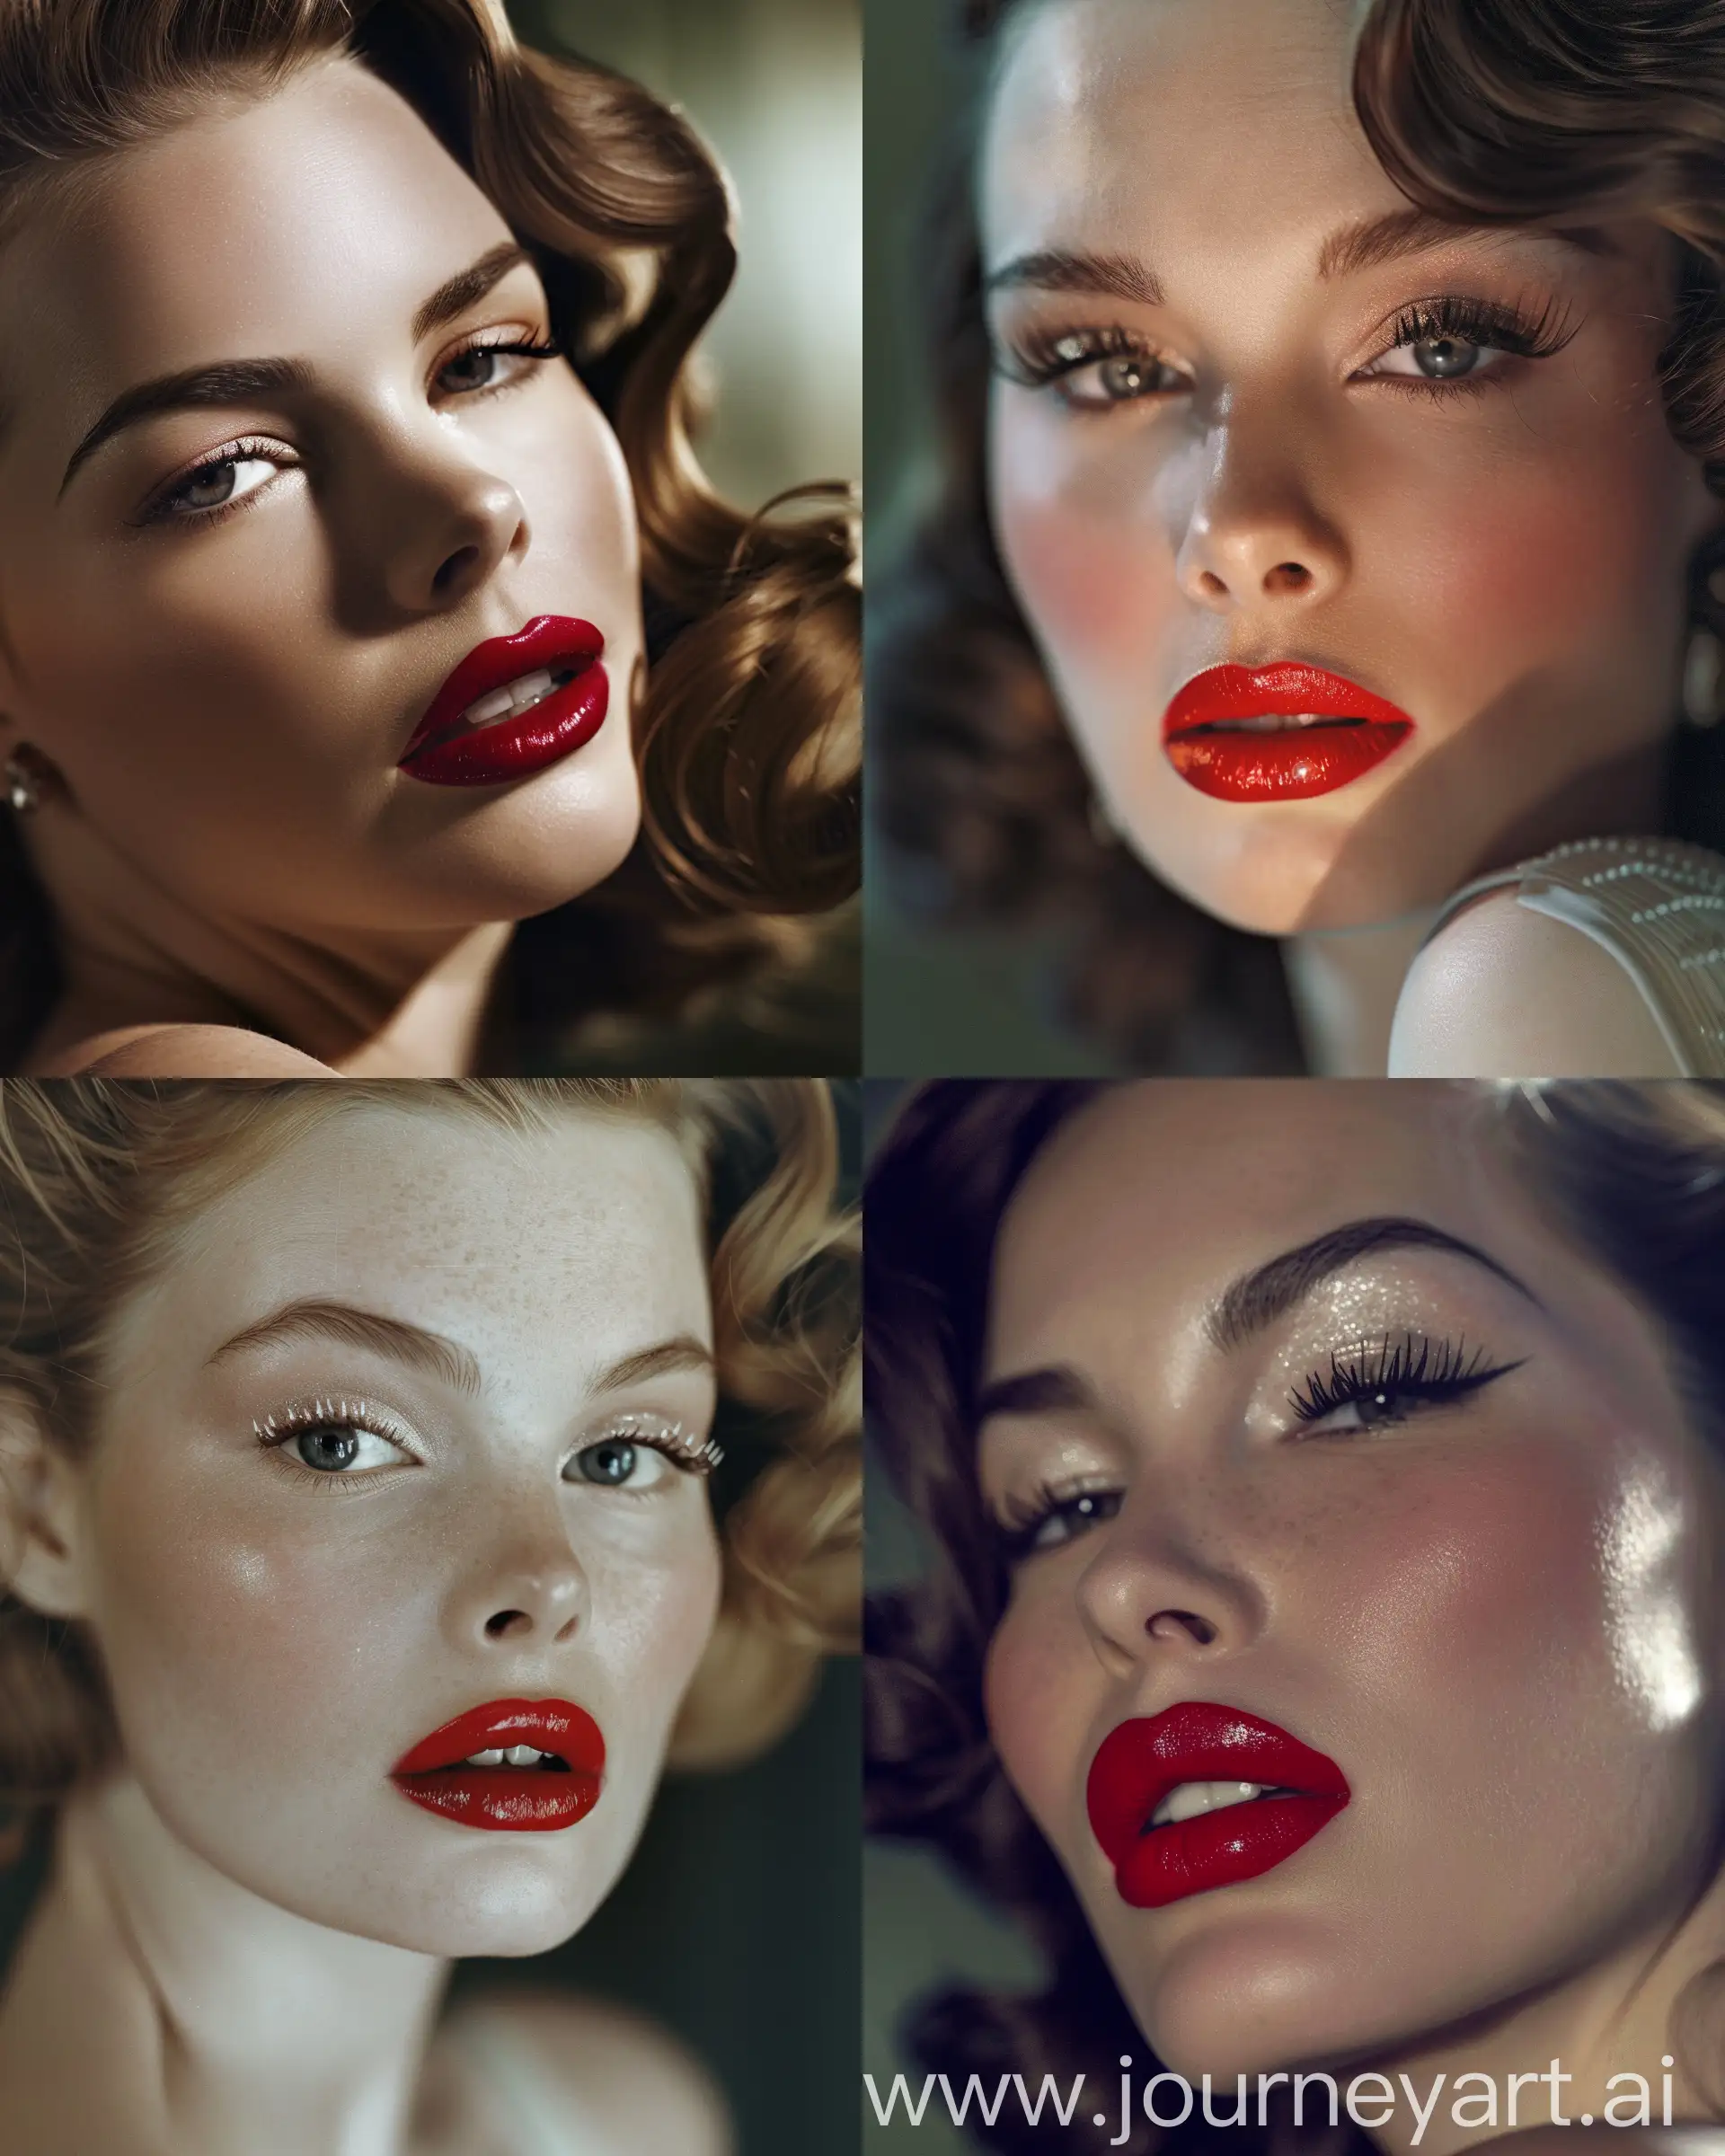 An elegant closeup portrait of a woman exuding a sense of classic
Hollywood glamour. Her full lips are painted with bold red matte lipstick, her
eyelashes are thick with mascara and her cheeks are highlighted to perfection.
The hair is styled in sleek vintage curls. All is set against a backdrop of soft,
diffuse lighting to accentuate the luxurious feel of the scene, at night 1950s --ar 4:5 --v 6 --
style raw